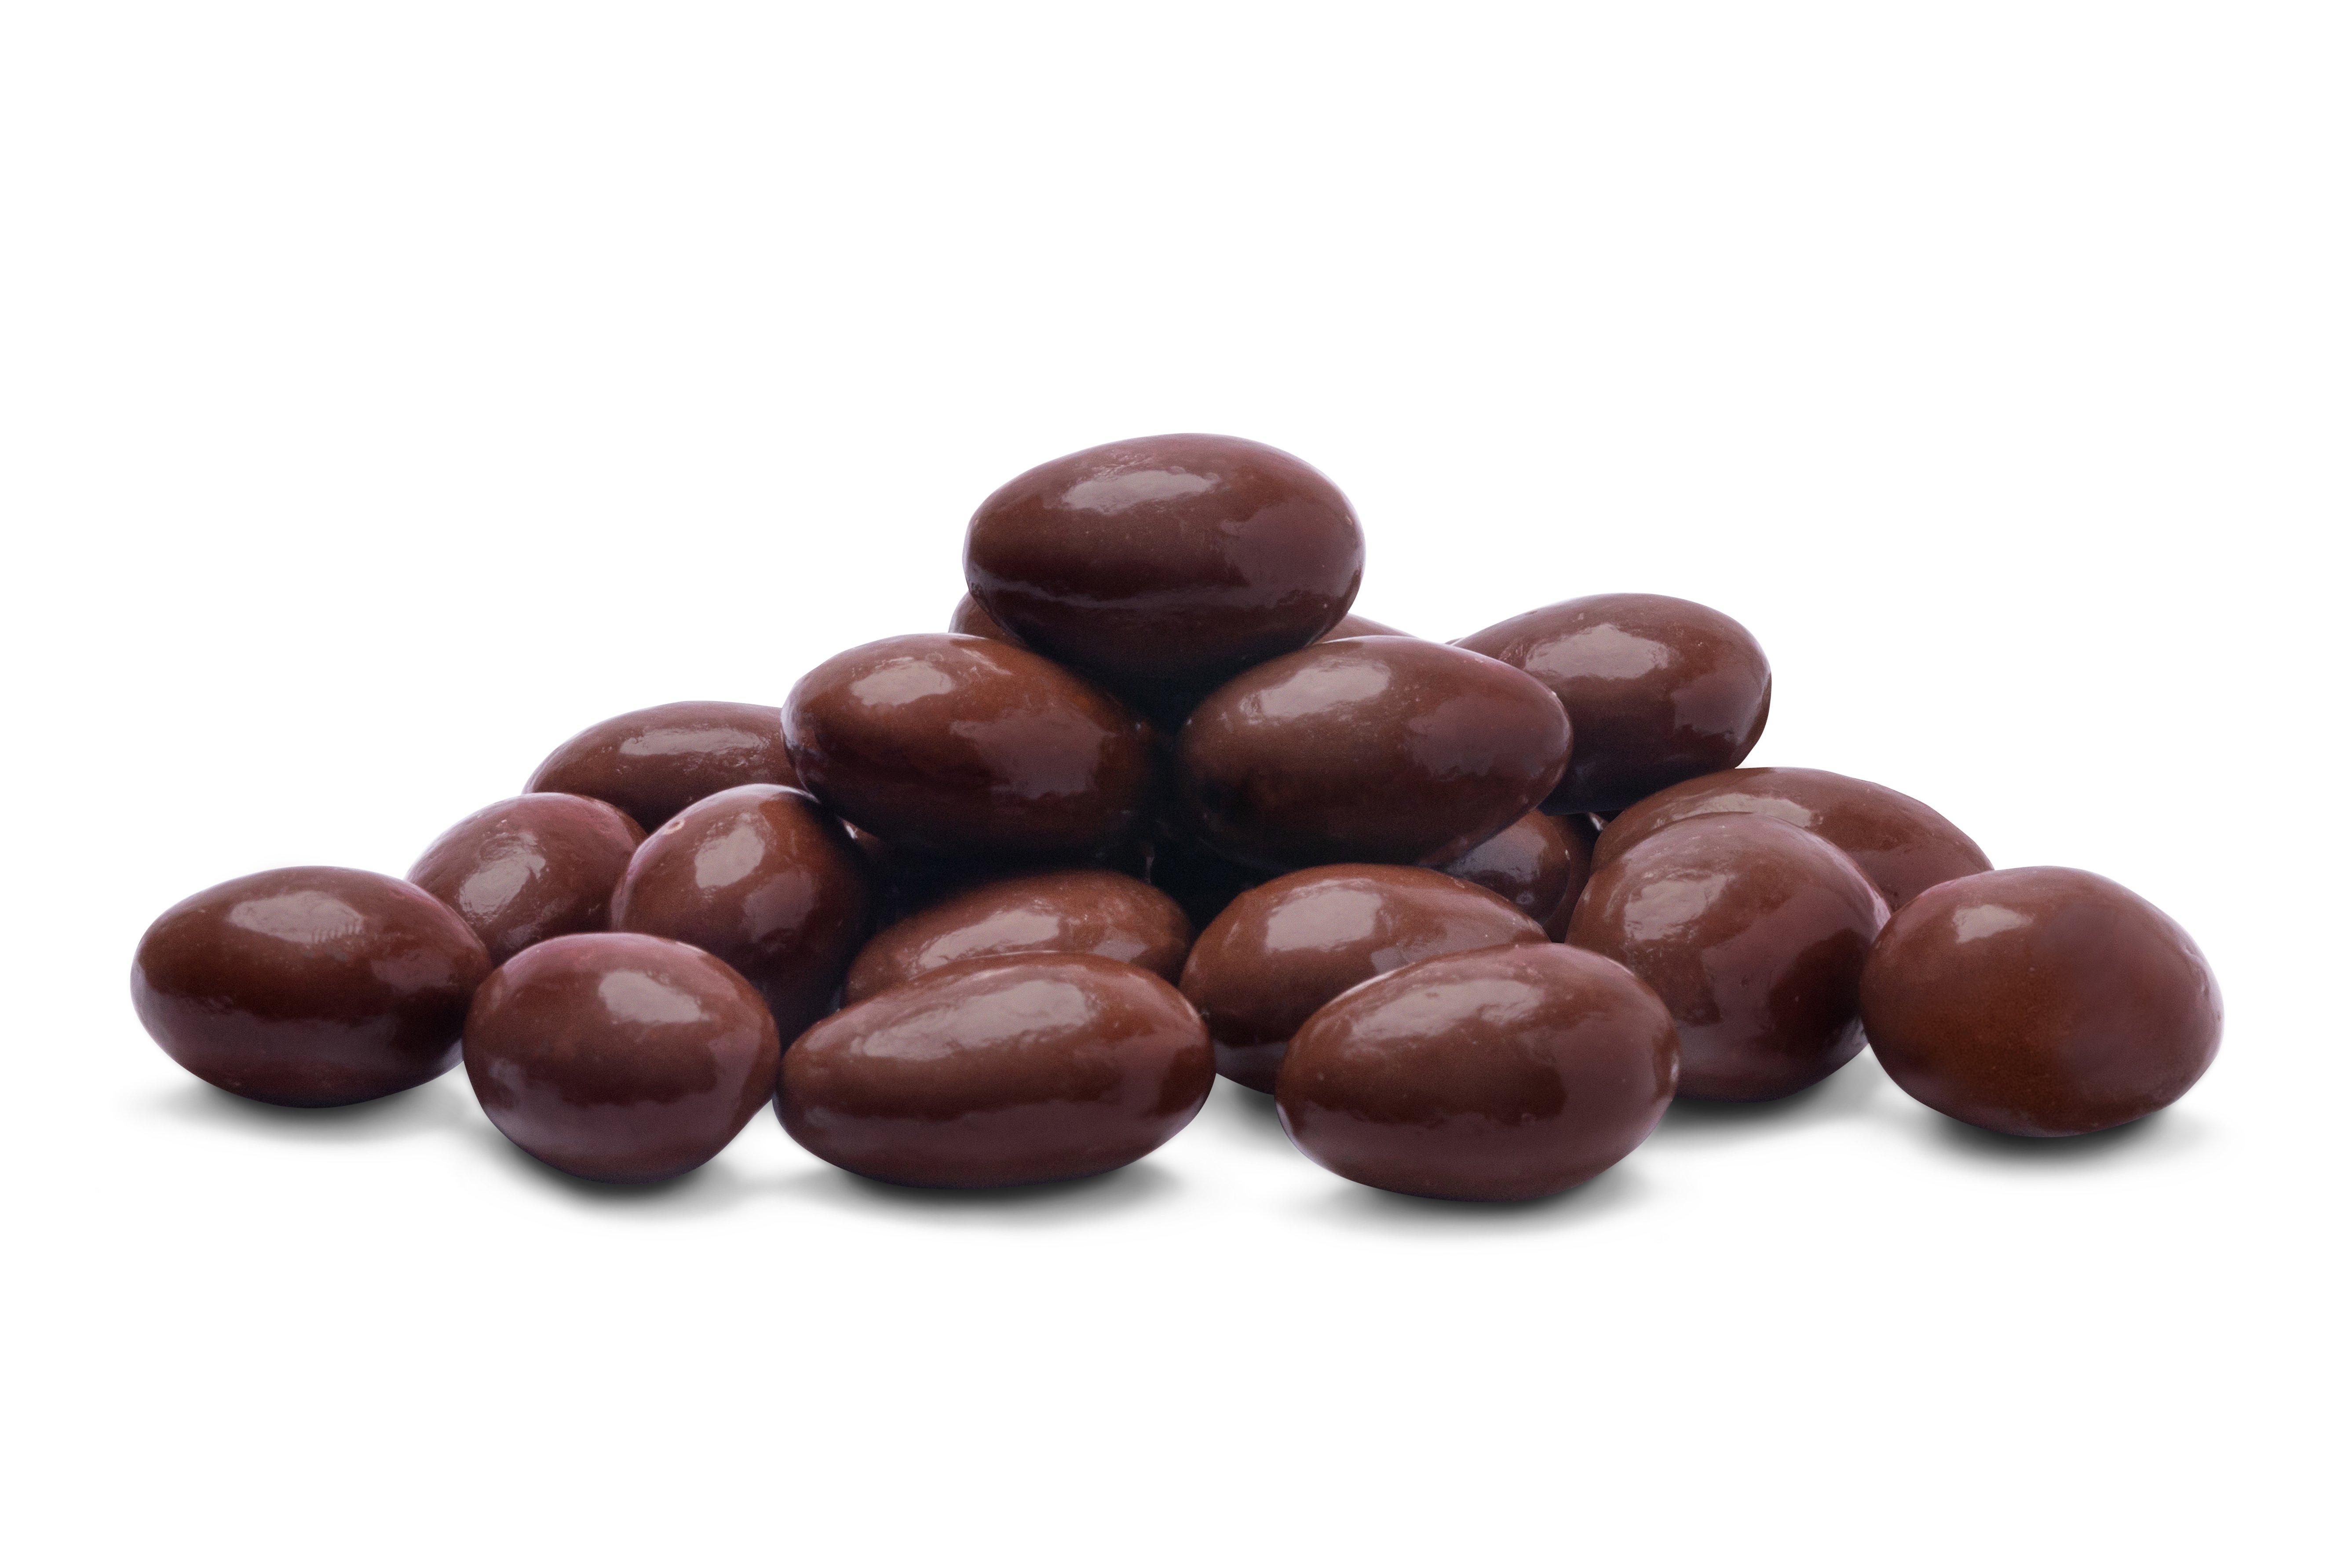 Save on M&M's Almond Chocolate Candies Family Size Order Online Delivery